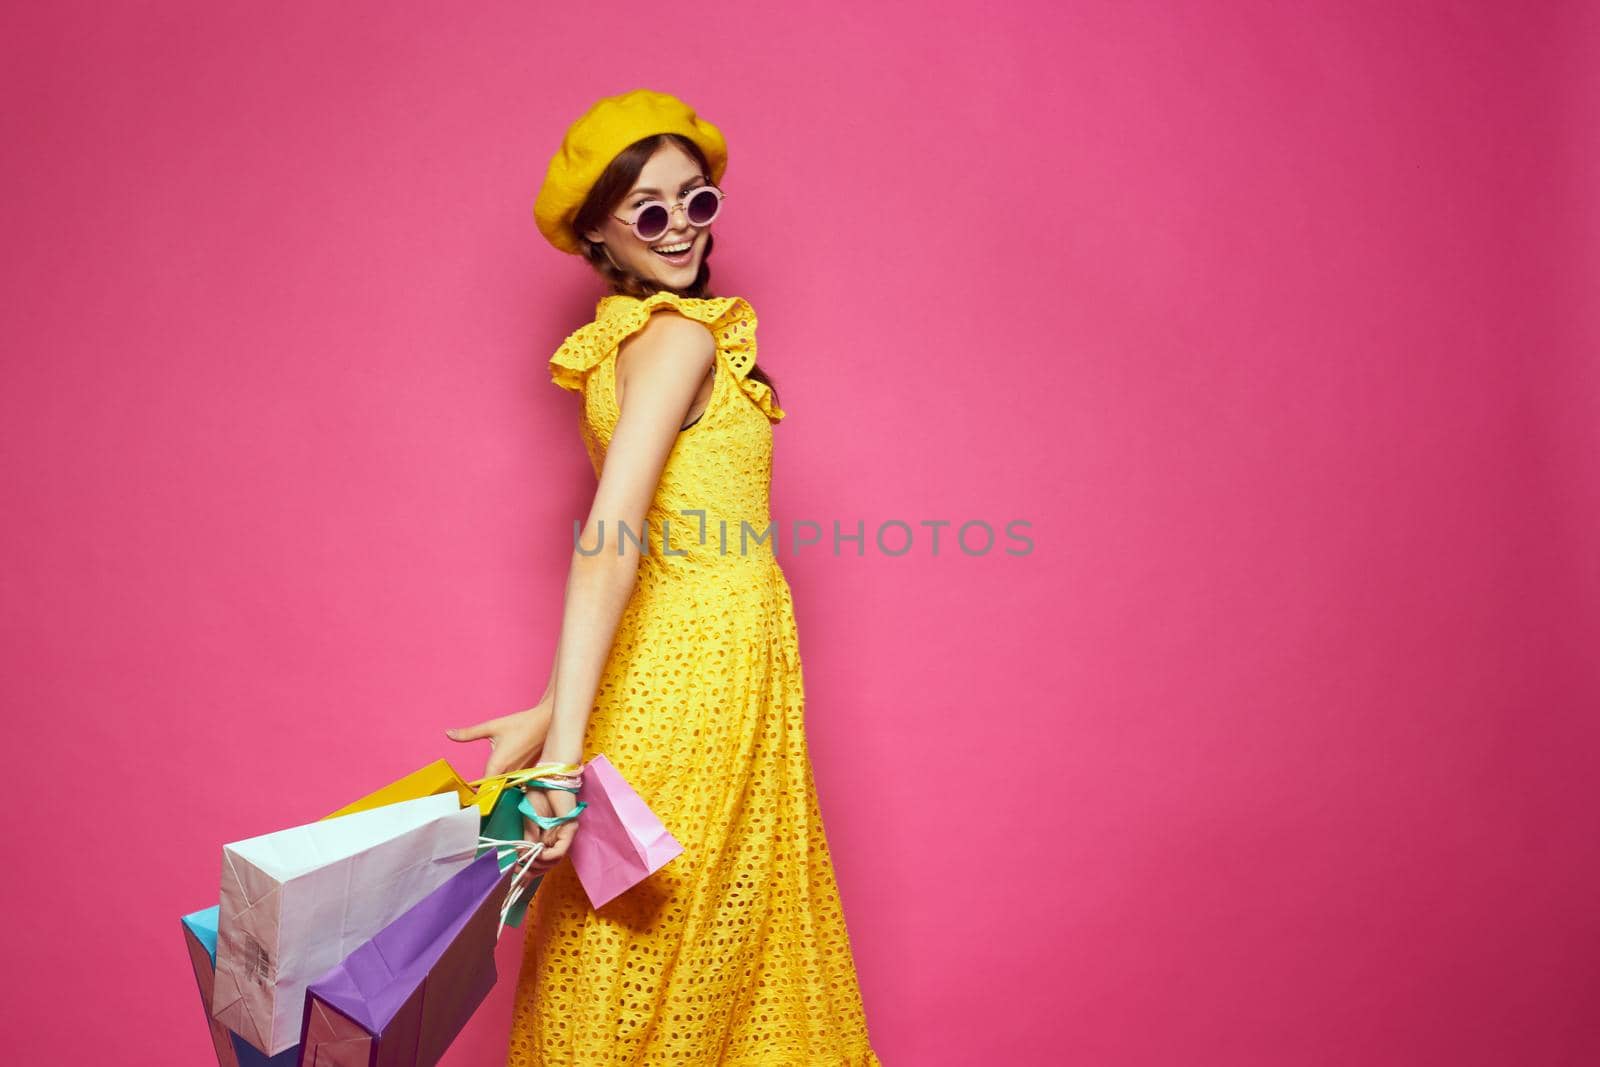 glamorous woman in a yellow hat Shopaholic fashion style pink background. High quality photo